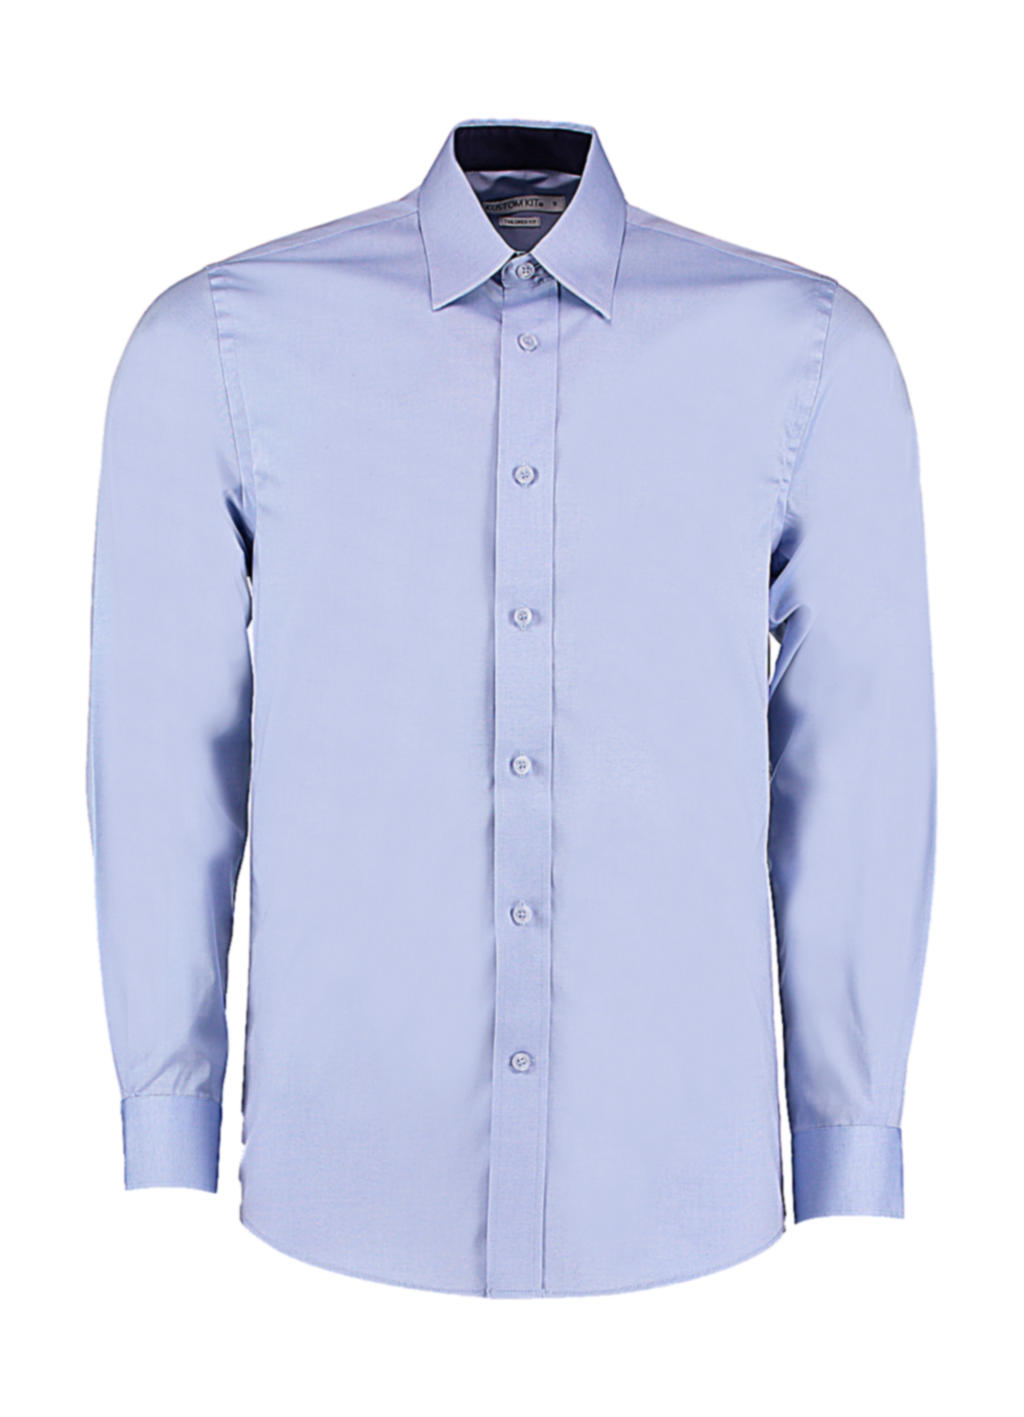  Tailored Fit Premium Contrast Oxford Shirt in Farbe Light Blue/Navy